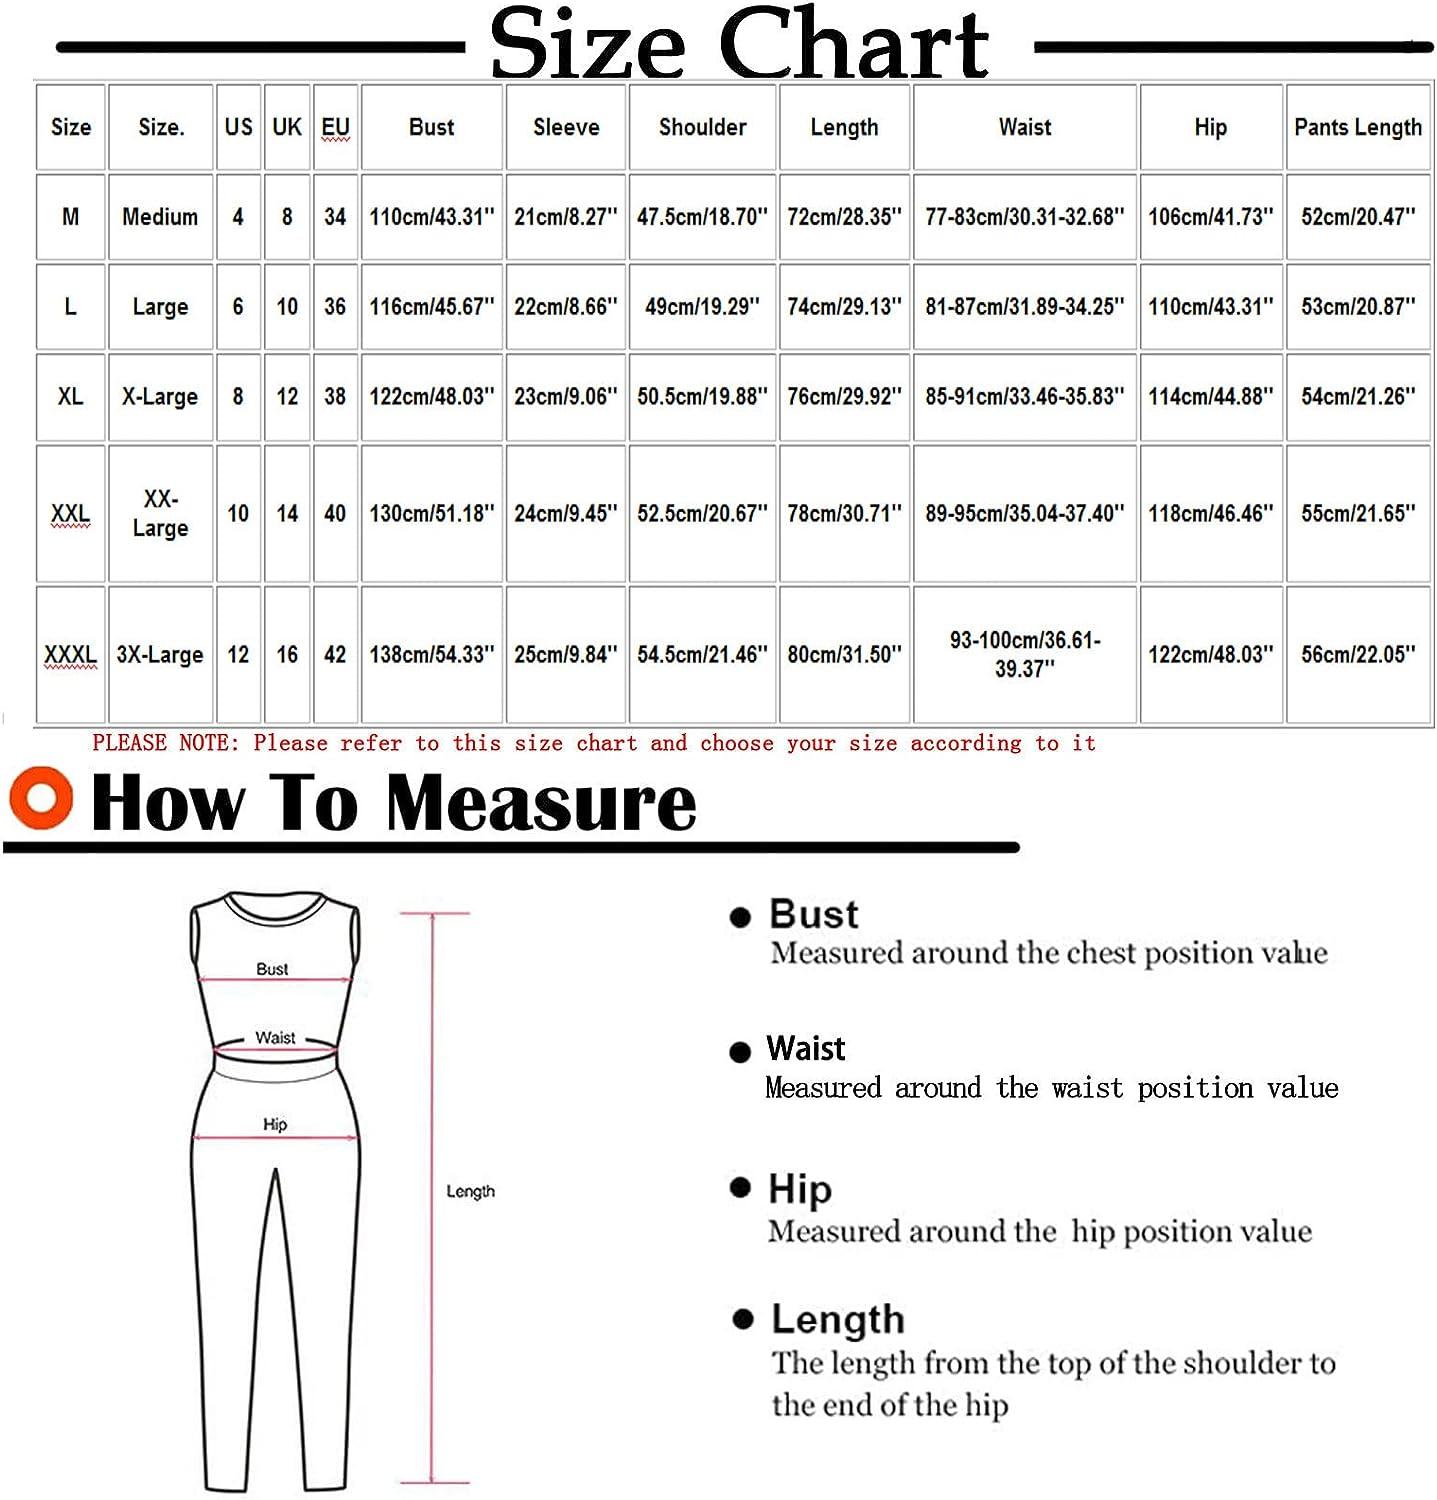  overnight delivery items-Women 2 Piece Outfit Summer Sleeveless  Tops and Shorts Sweatsuit Set Short Sleeve Cotton Linen Button Down Shirt  Sets : Sports & Outdoors